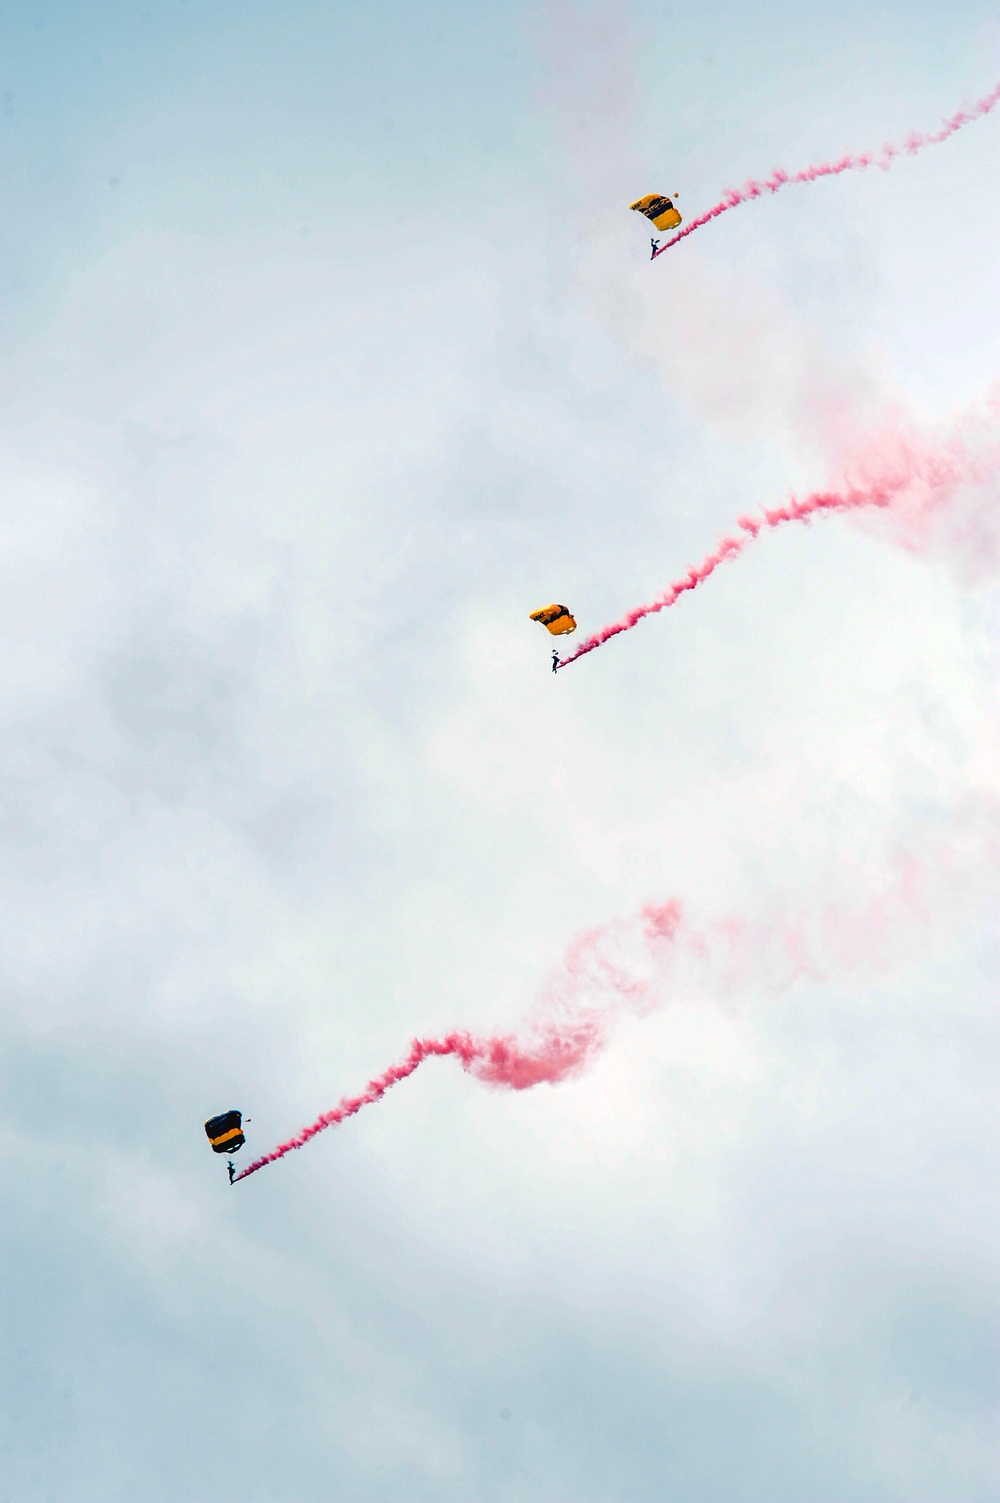 'Wings Over Whiteman' wows crowds